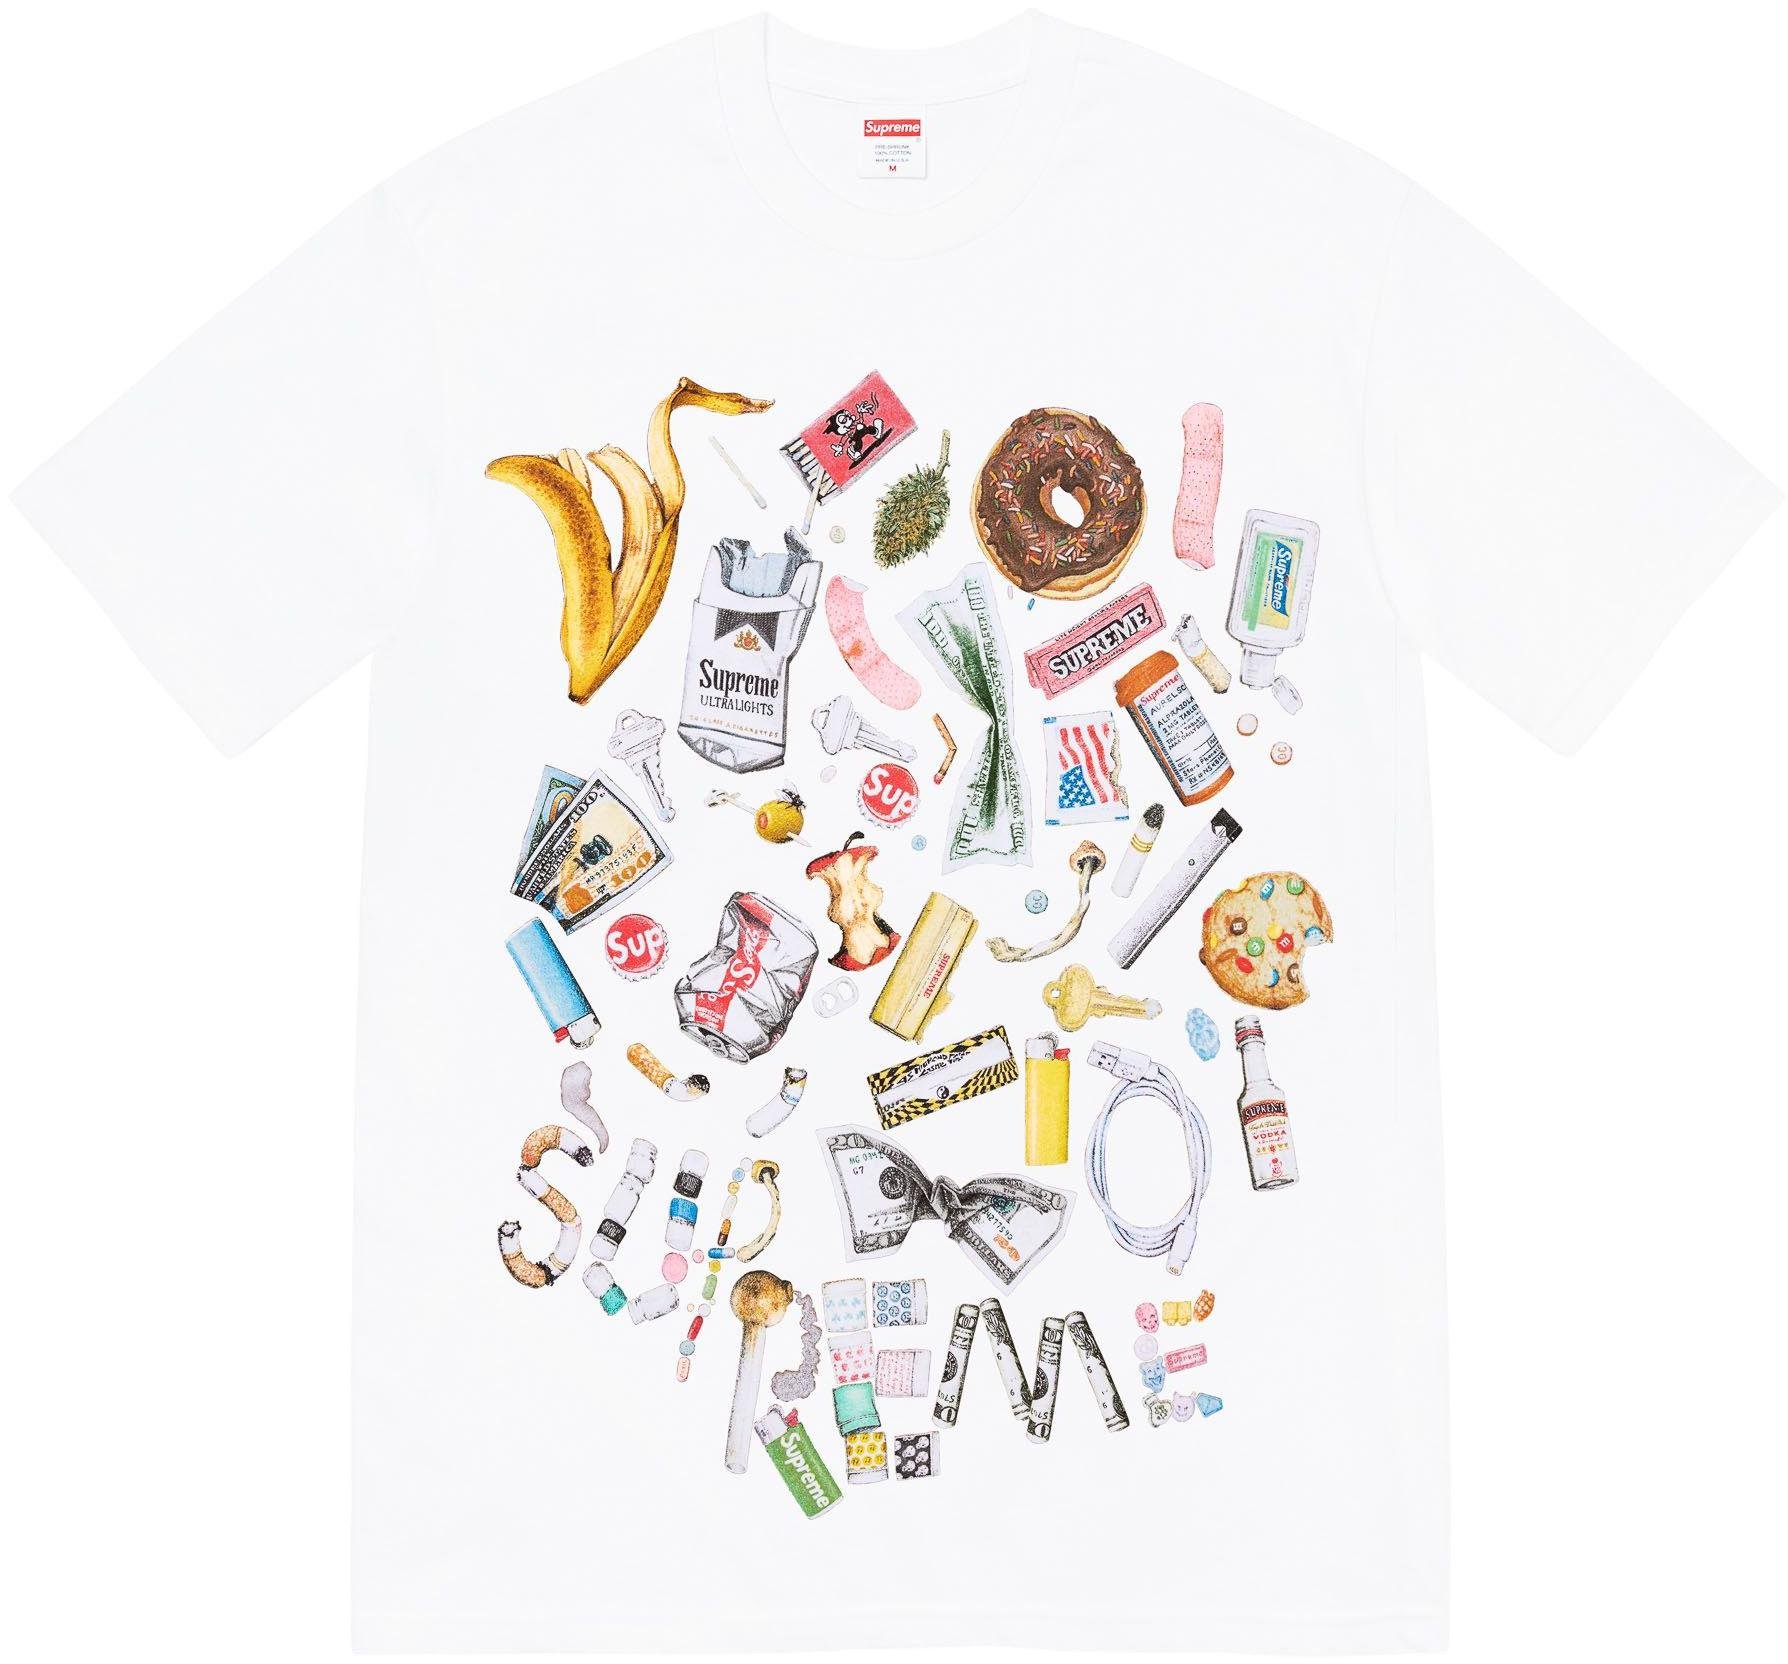 Supreme Spring 2023 Tees Release Date and Info